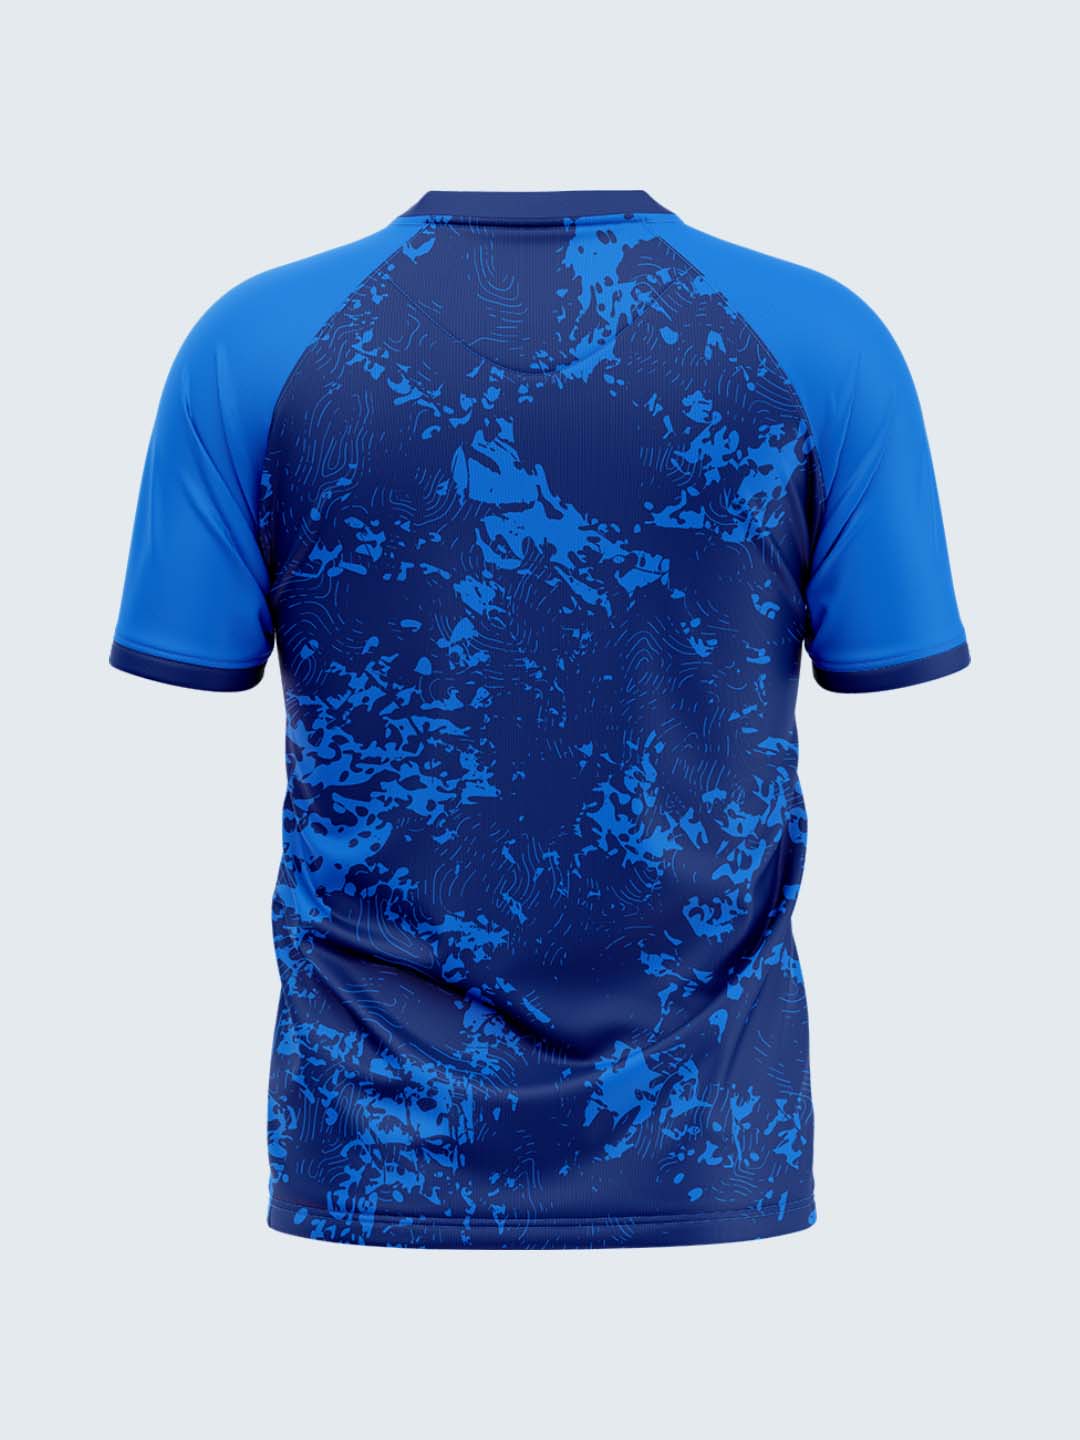 Men's Abstract Rugby Jersey: Blue - Front